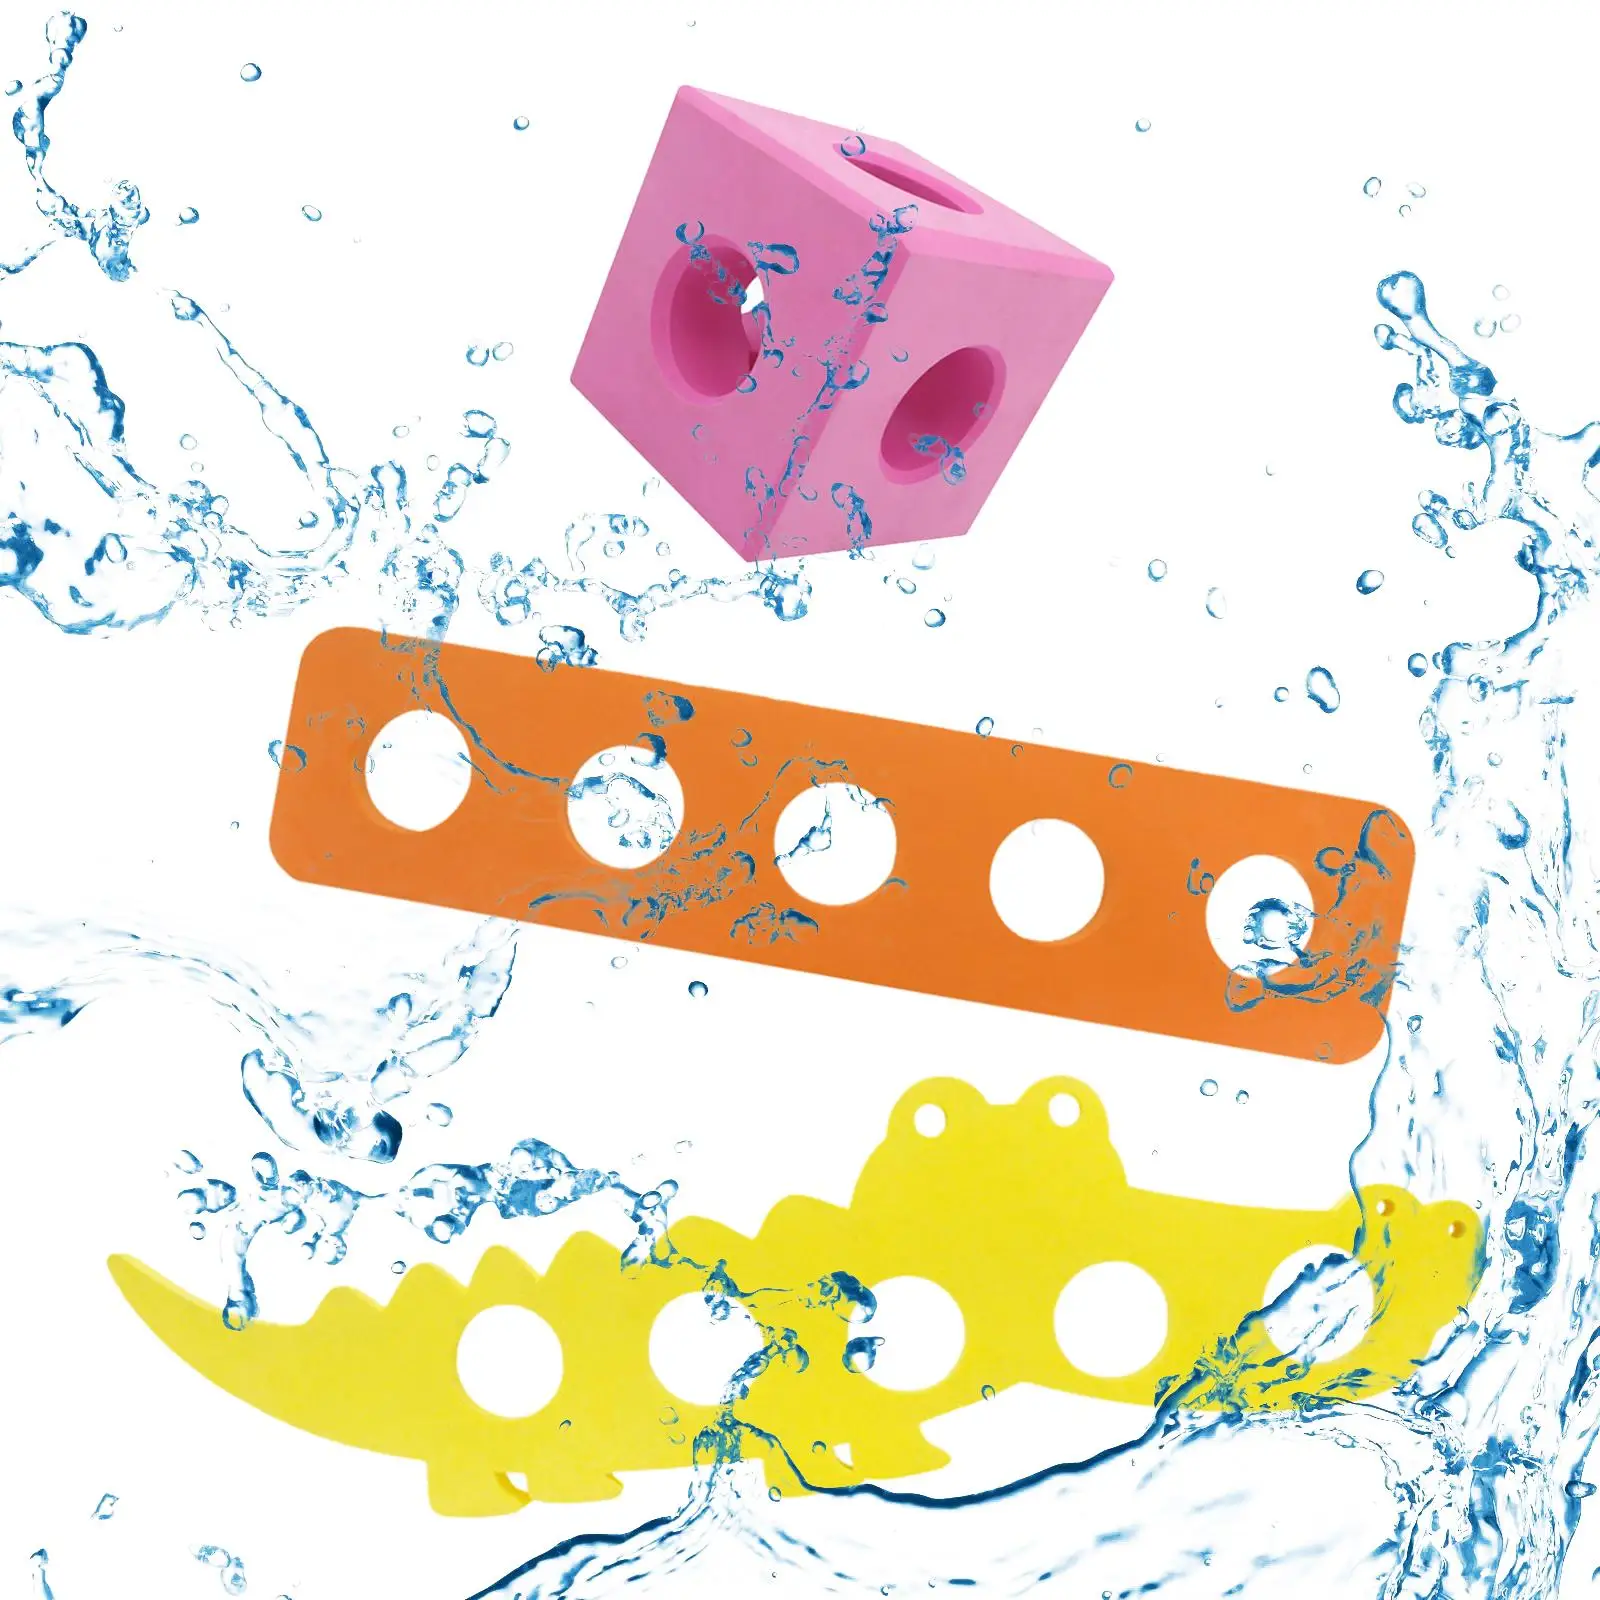 Pool Connector Hollow Builder with Holes Swimming Pool Water Connector Swimming Float for Beds Adults Water Sports Kids Outdoor